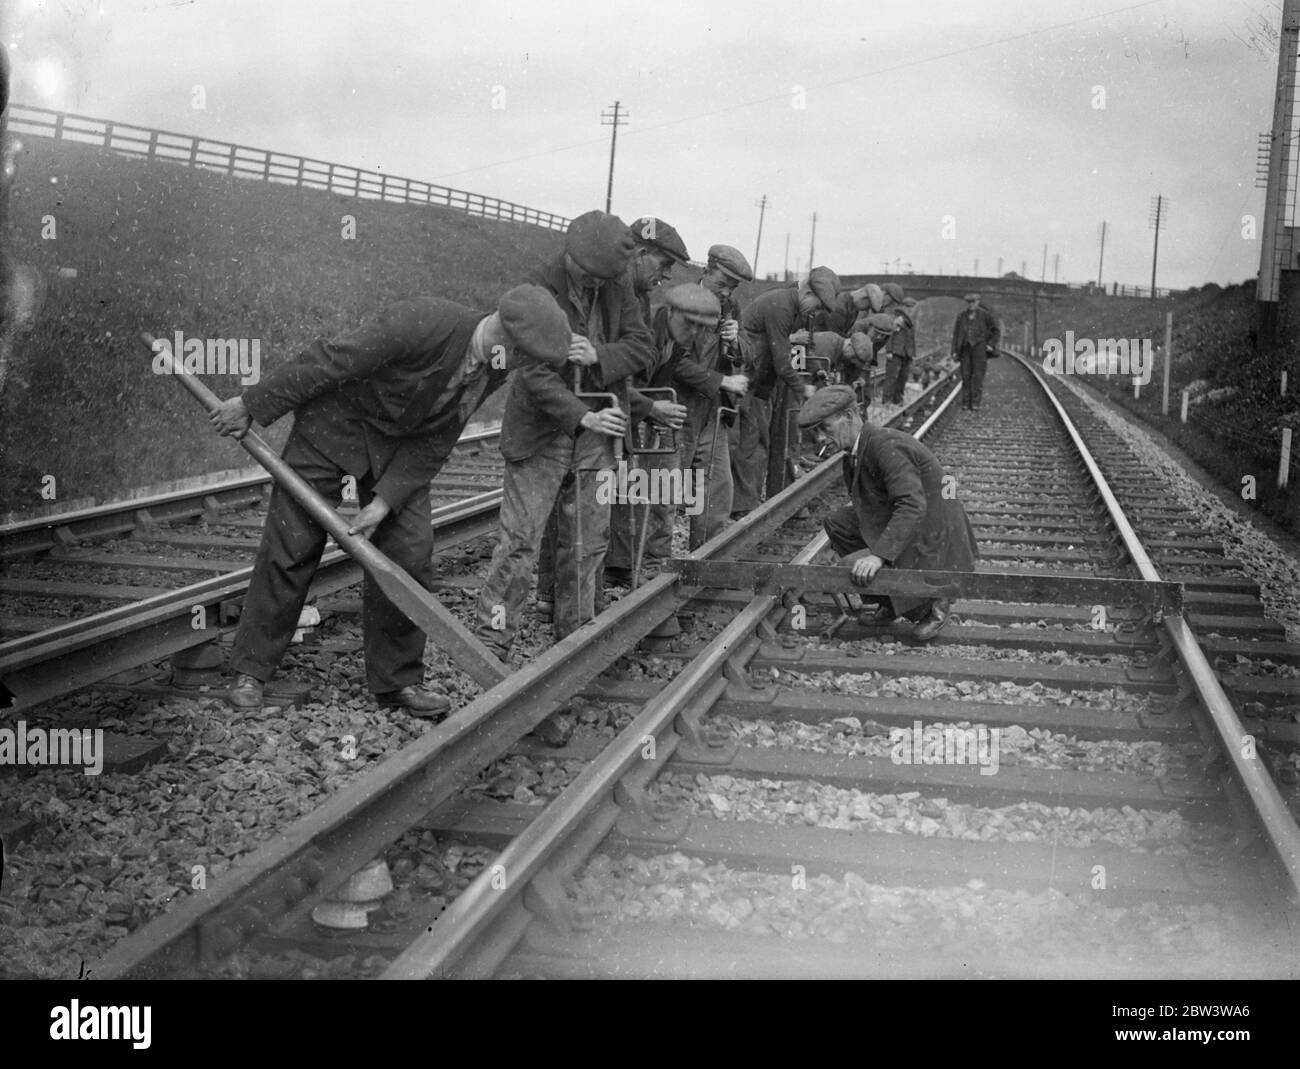 Five hundred men relay 80 miles of rail in four days as LNER make big change over Tyneside . Five hundred men are engaged near Newcastle on one of the most complex high speed enginearing jobs carried out in Britain for some time . Eighty miles of steel conductor rail is being taken up and relaid in four days . To conform with modern standards the conductor rail throughout the whole length of the LNER electrified lines on Tyneside is being taken up and moved 3 1 / 4 inches nearer the running rail . Fifty thousand insulators have to be removed and the whole of the continuity track cables require Stock Photo